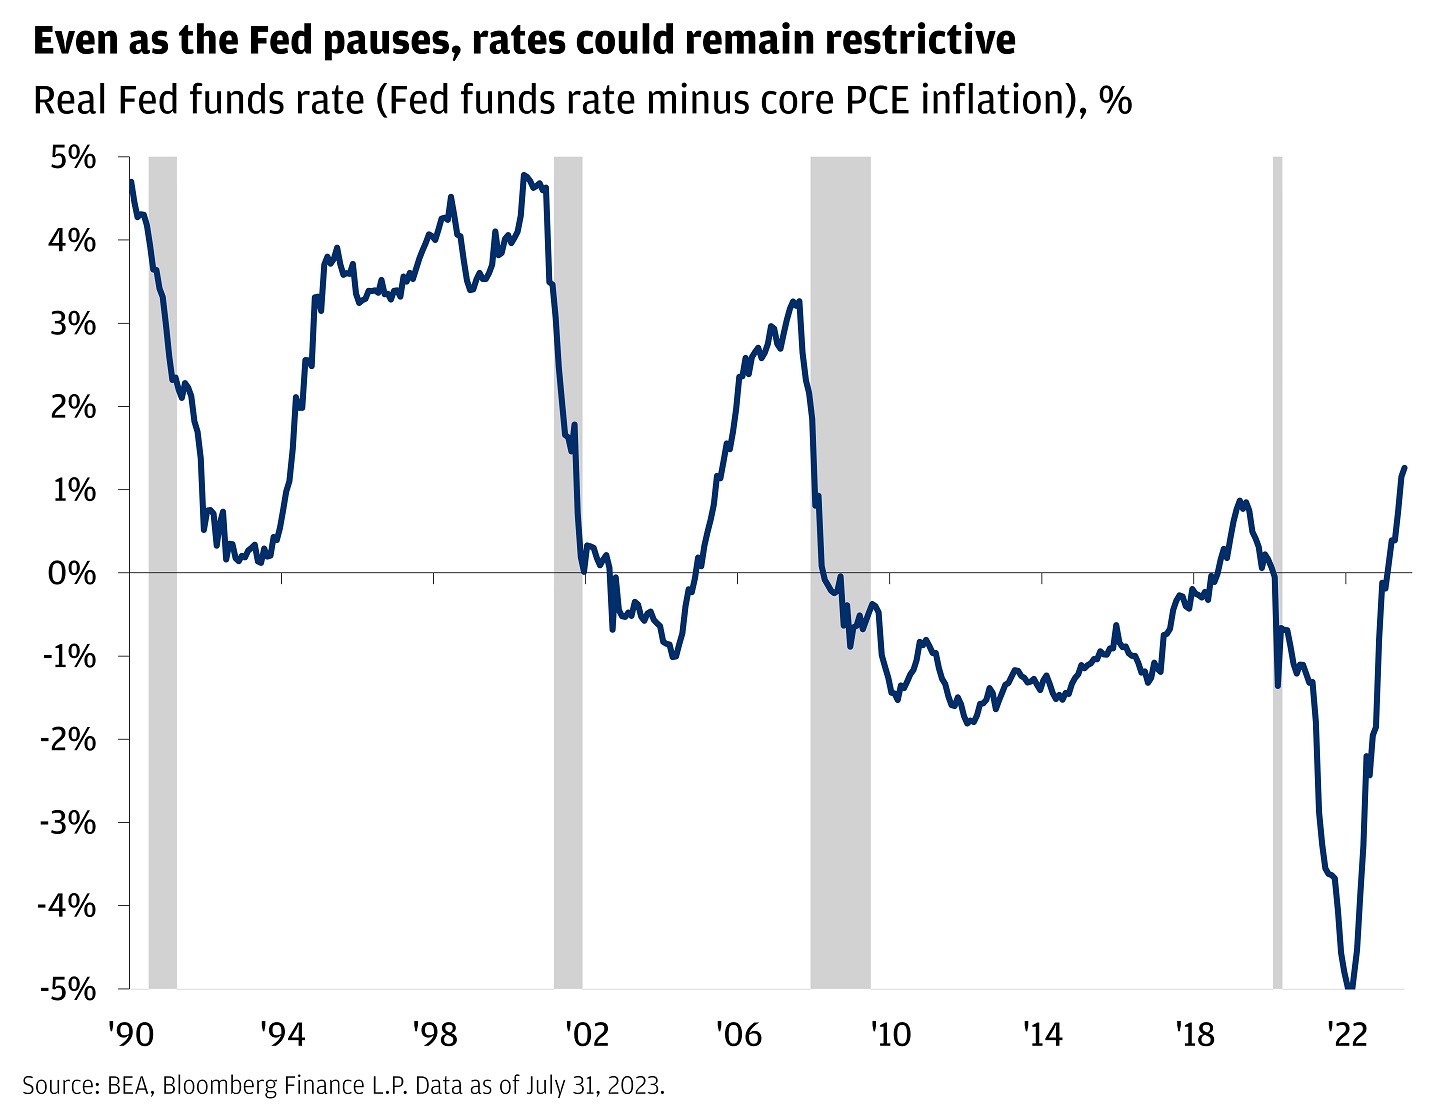 The chart describes the real Fed funds rate (Fed funds rate minus core PCE inflation) in %.